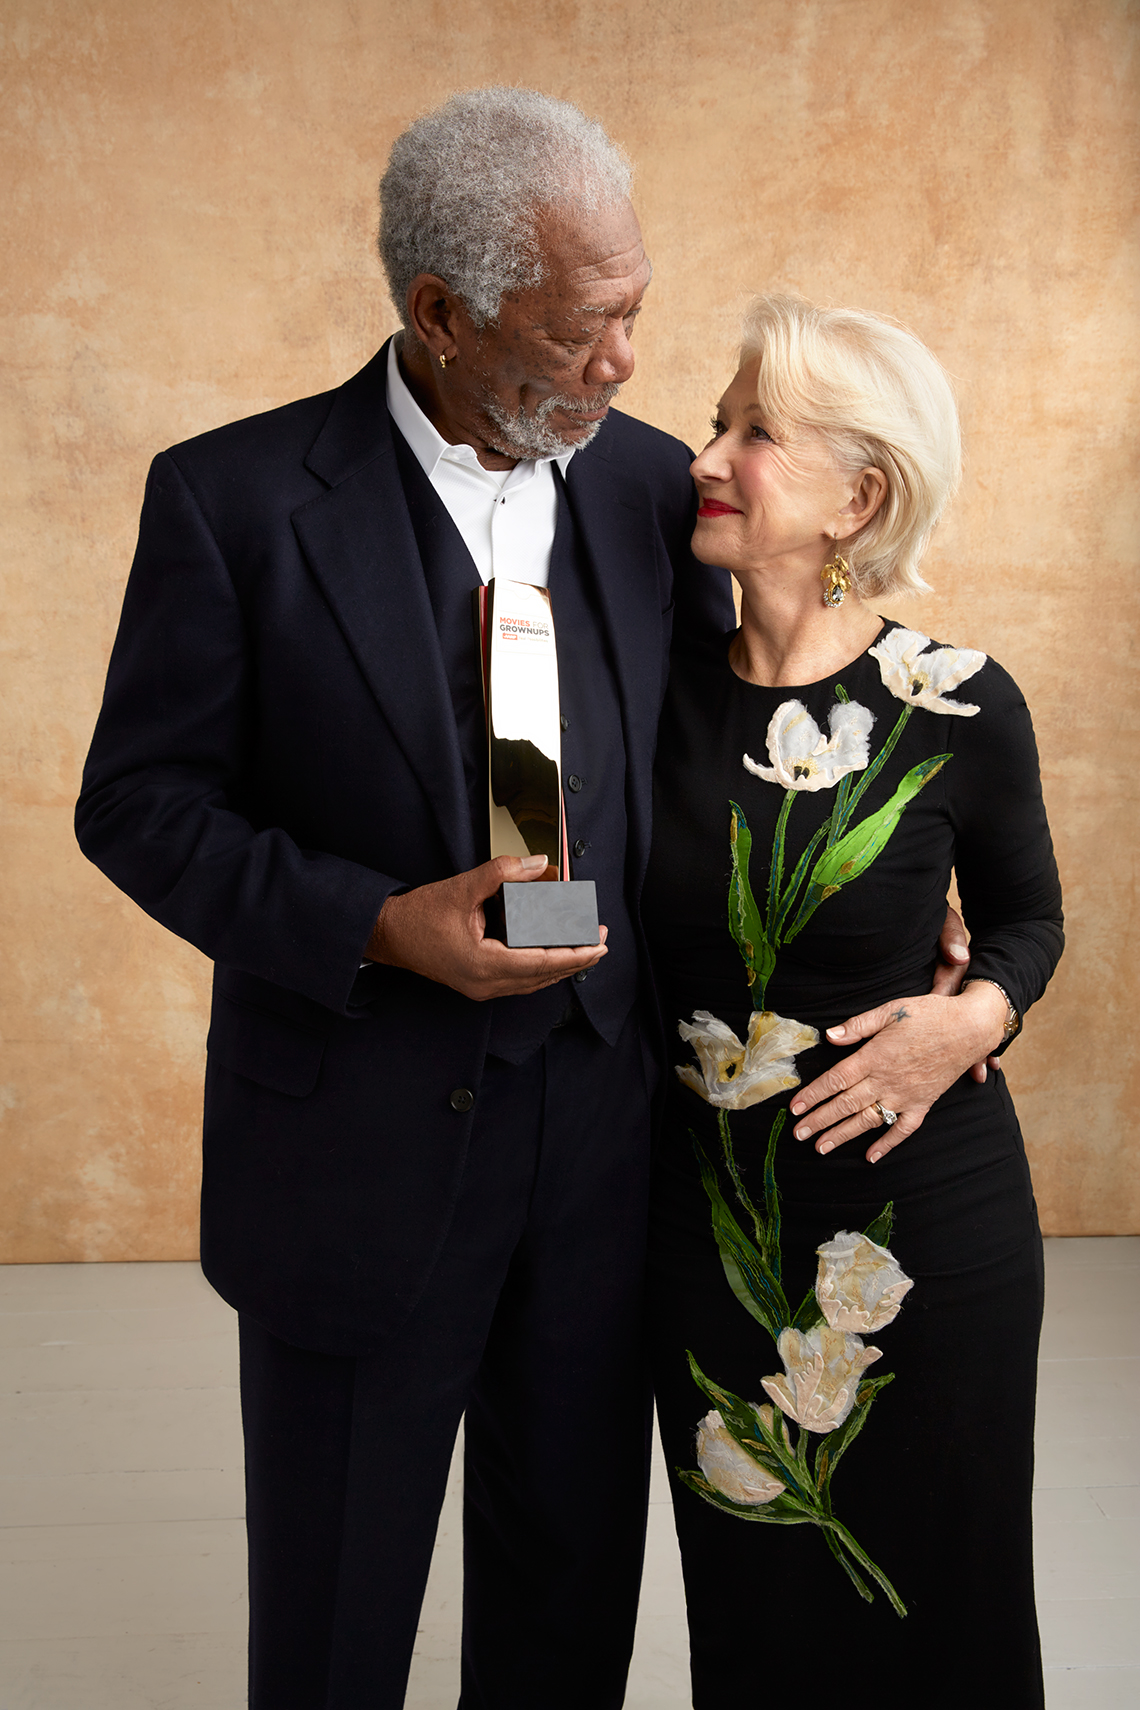 Morgan Freeman and Helen Mirren at the 16th Annual AARP The Magazine's Movies for Grownups Awards